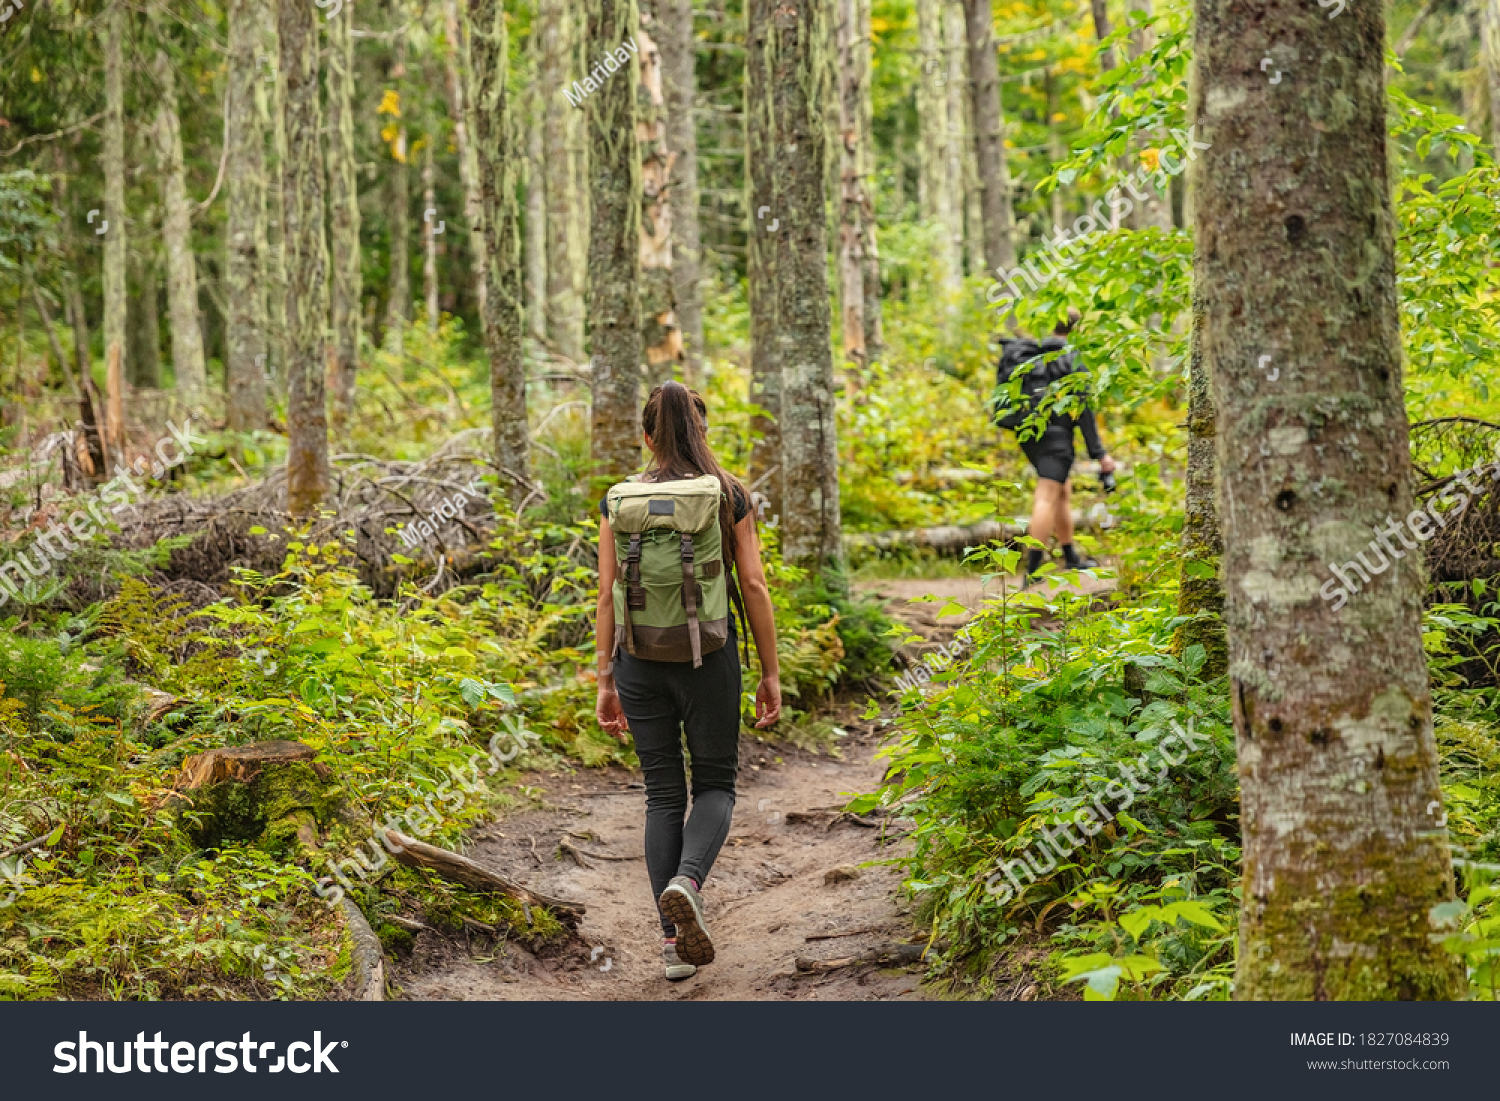 Hike trail hiker woman walking in autumn fall nature woods during fall season. Hiking active people tourists wearing backpacks outdoors trekking in pine forest. #1827084839